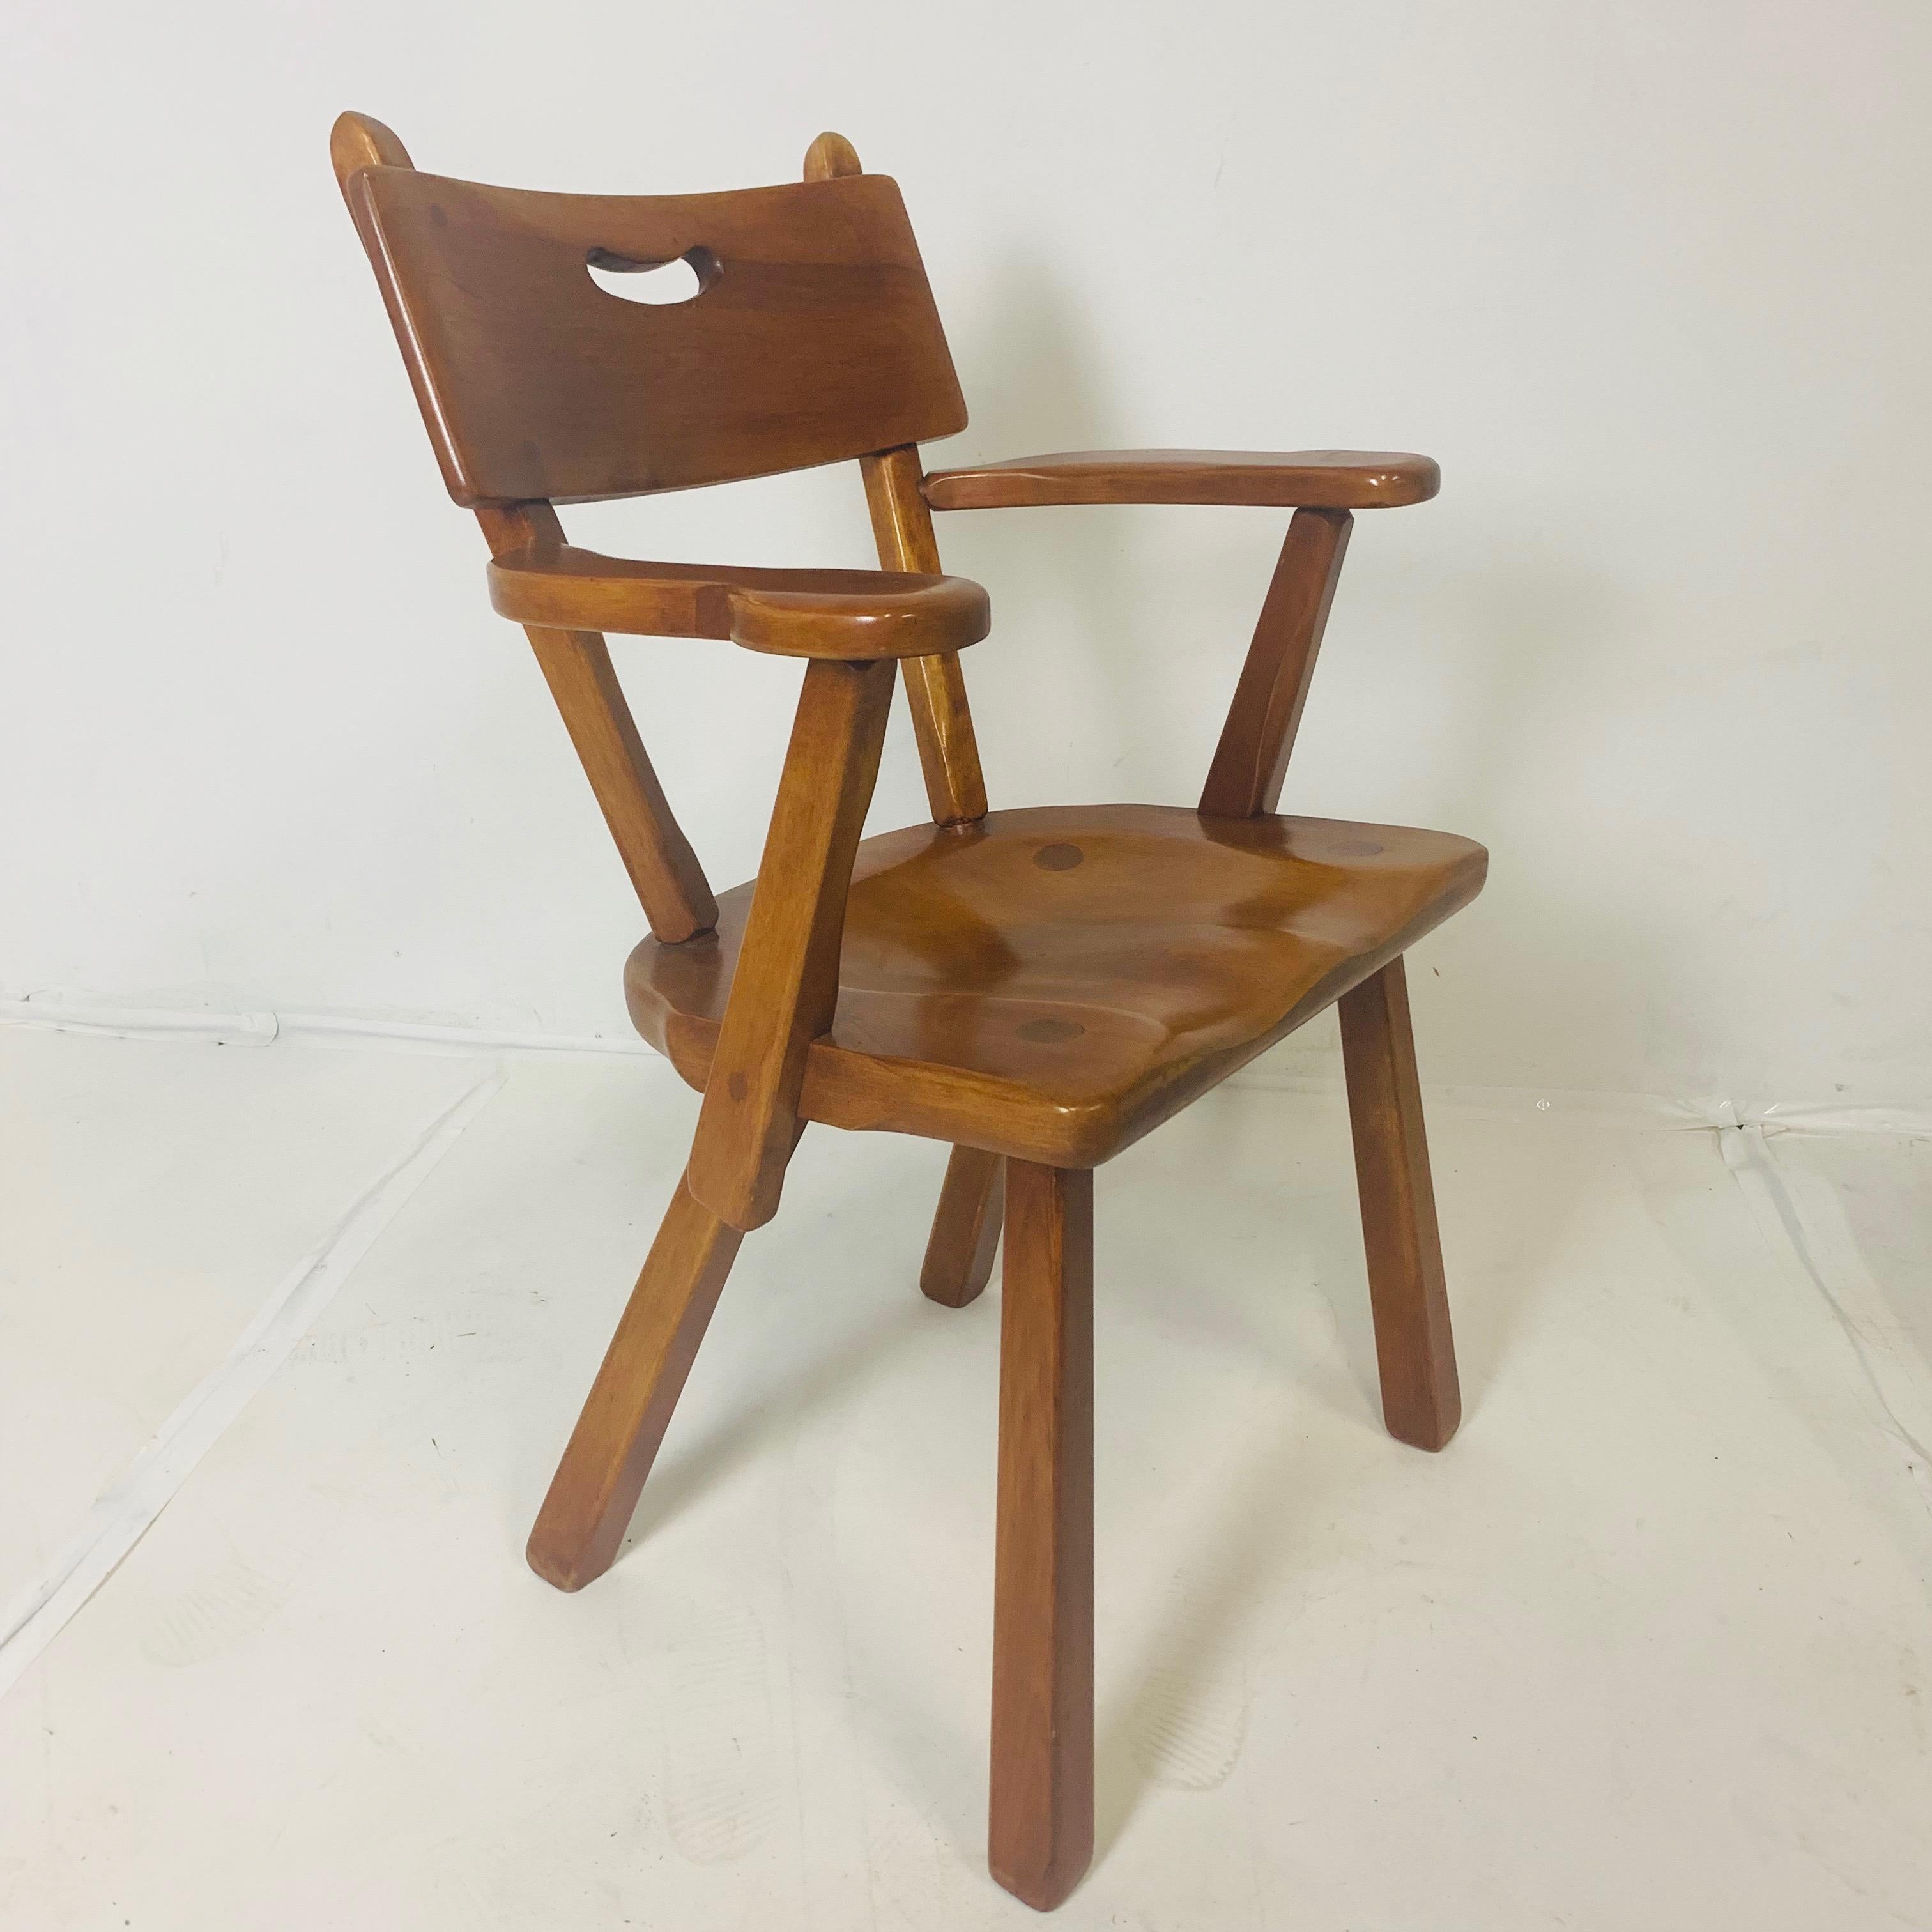 Modern craftsman style chairs produced by Cushman Vermont. Made of Vermont hard rock maple. Designed by Herman DeVries. Metal ID tags attached.
Measures: H 34 in. x W 22.75 in. x D 19 in.

Also 2 side chairs as shown in last photo.  
Special